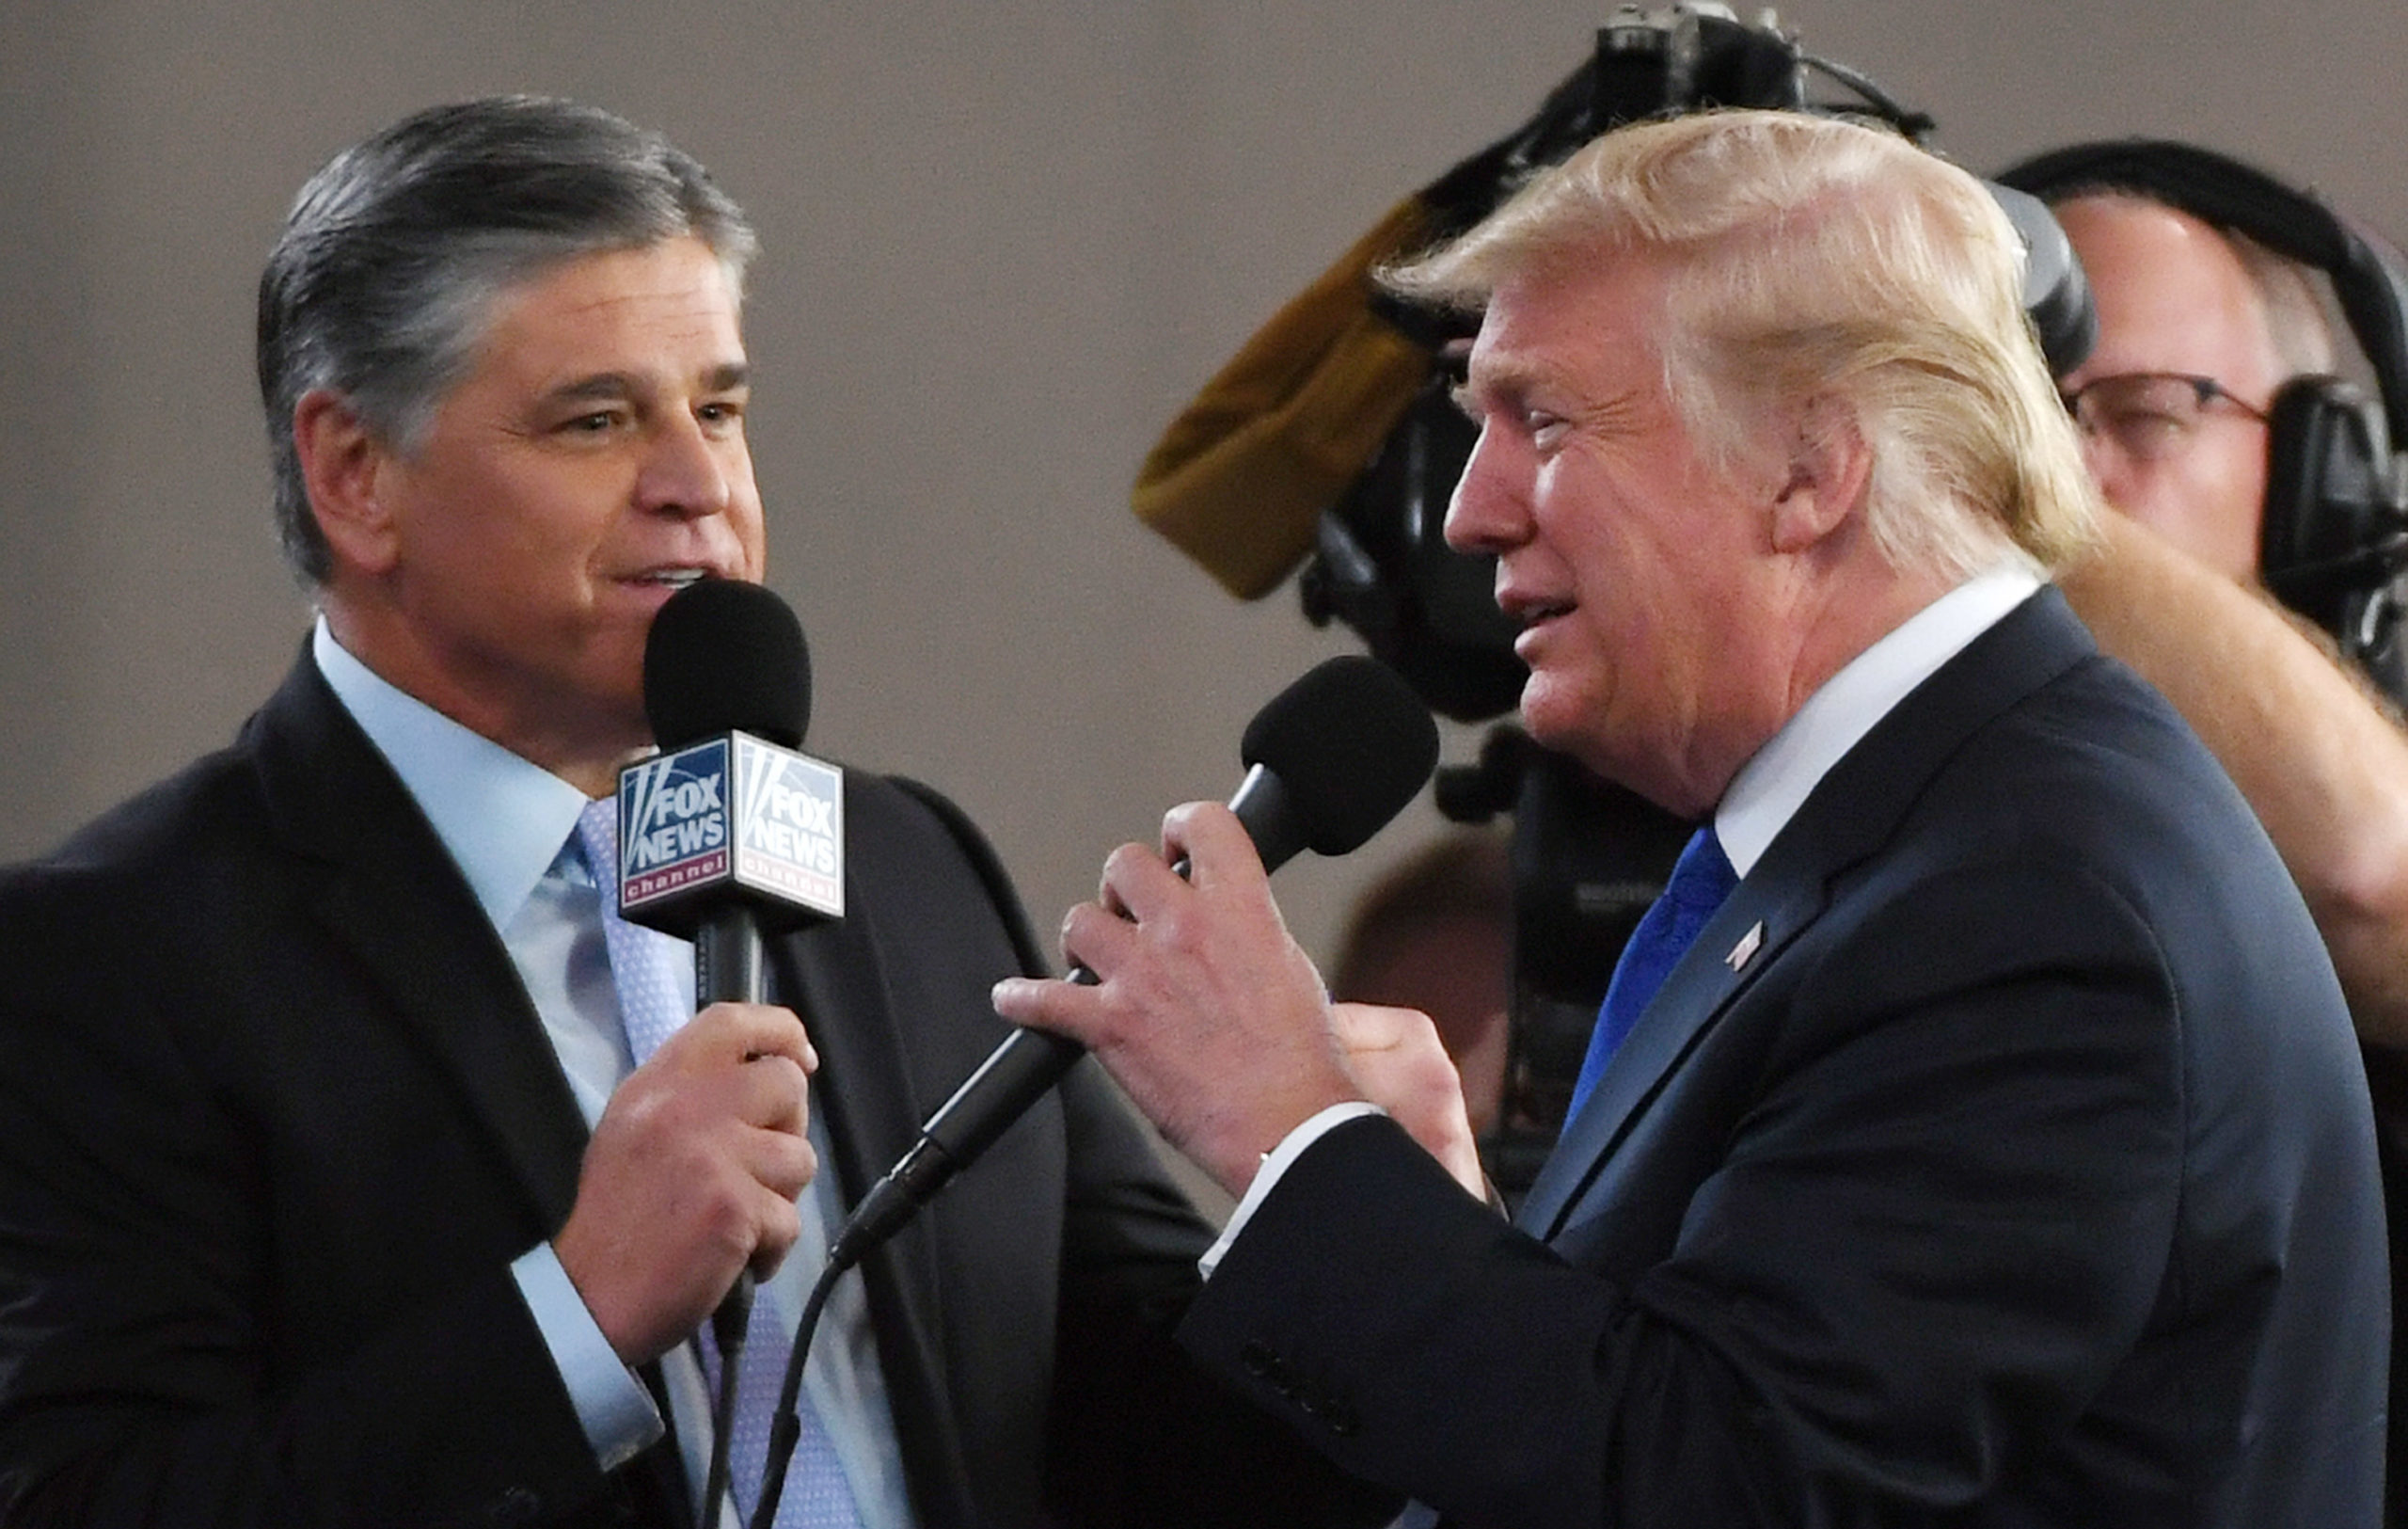 ‘I Did Not Believe It for One Second’: Hannity Testifies Under Oath He Didn’t Buy Trump Election Fraud Claim (mediaite.com)